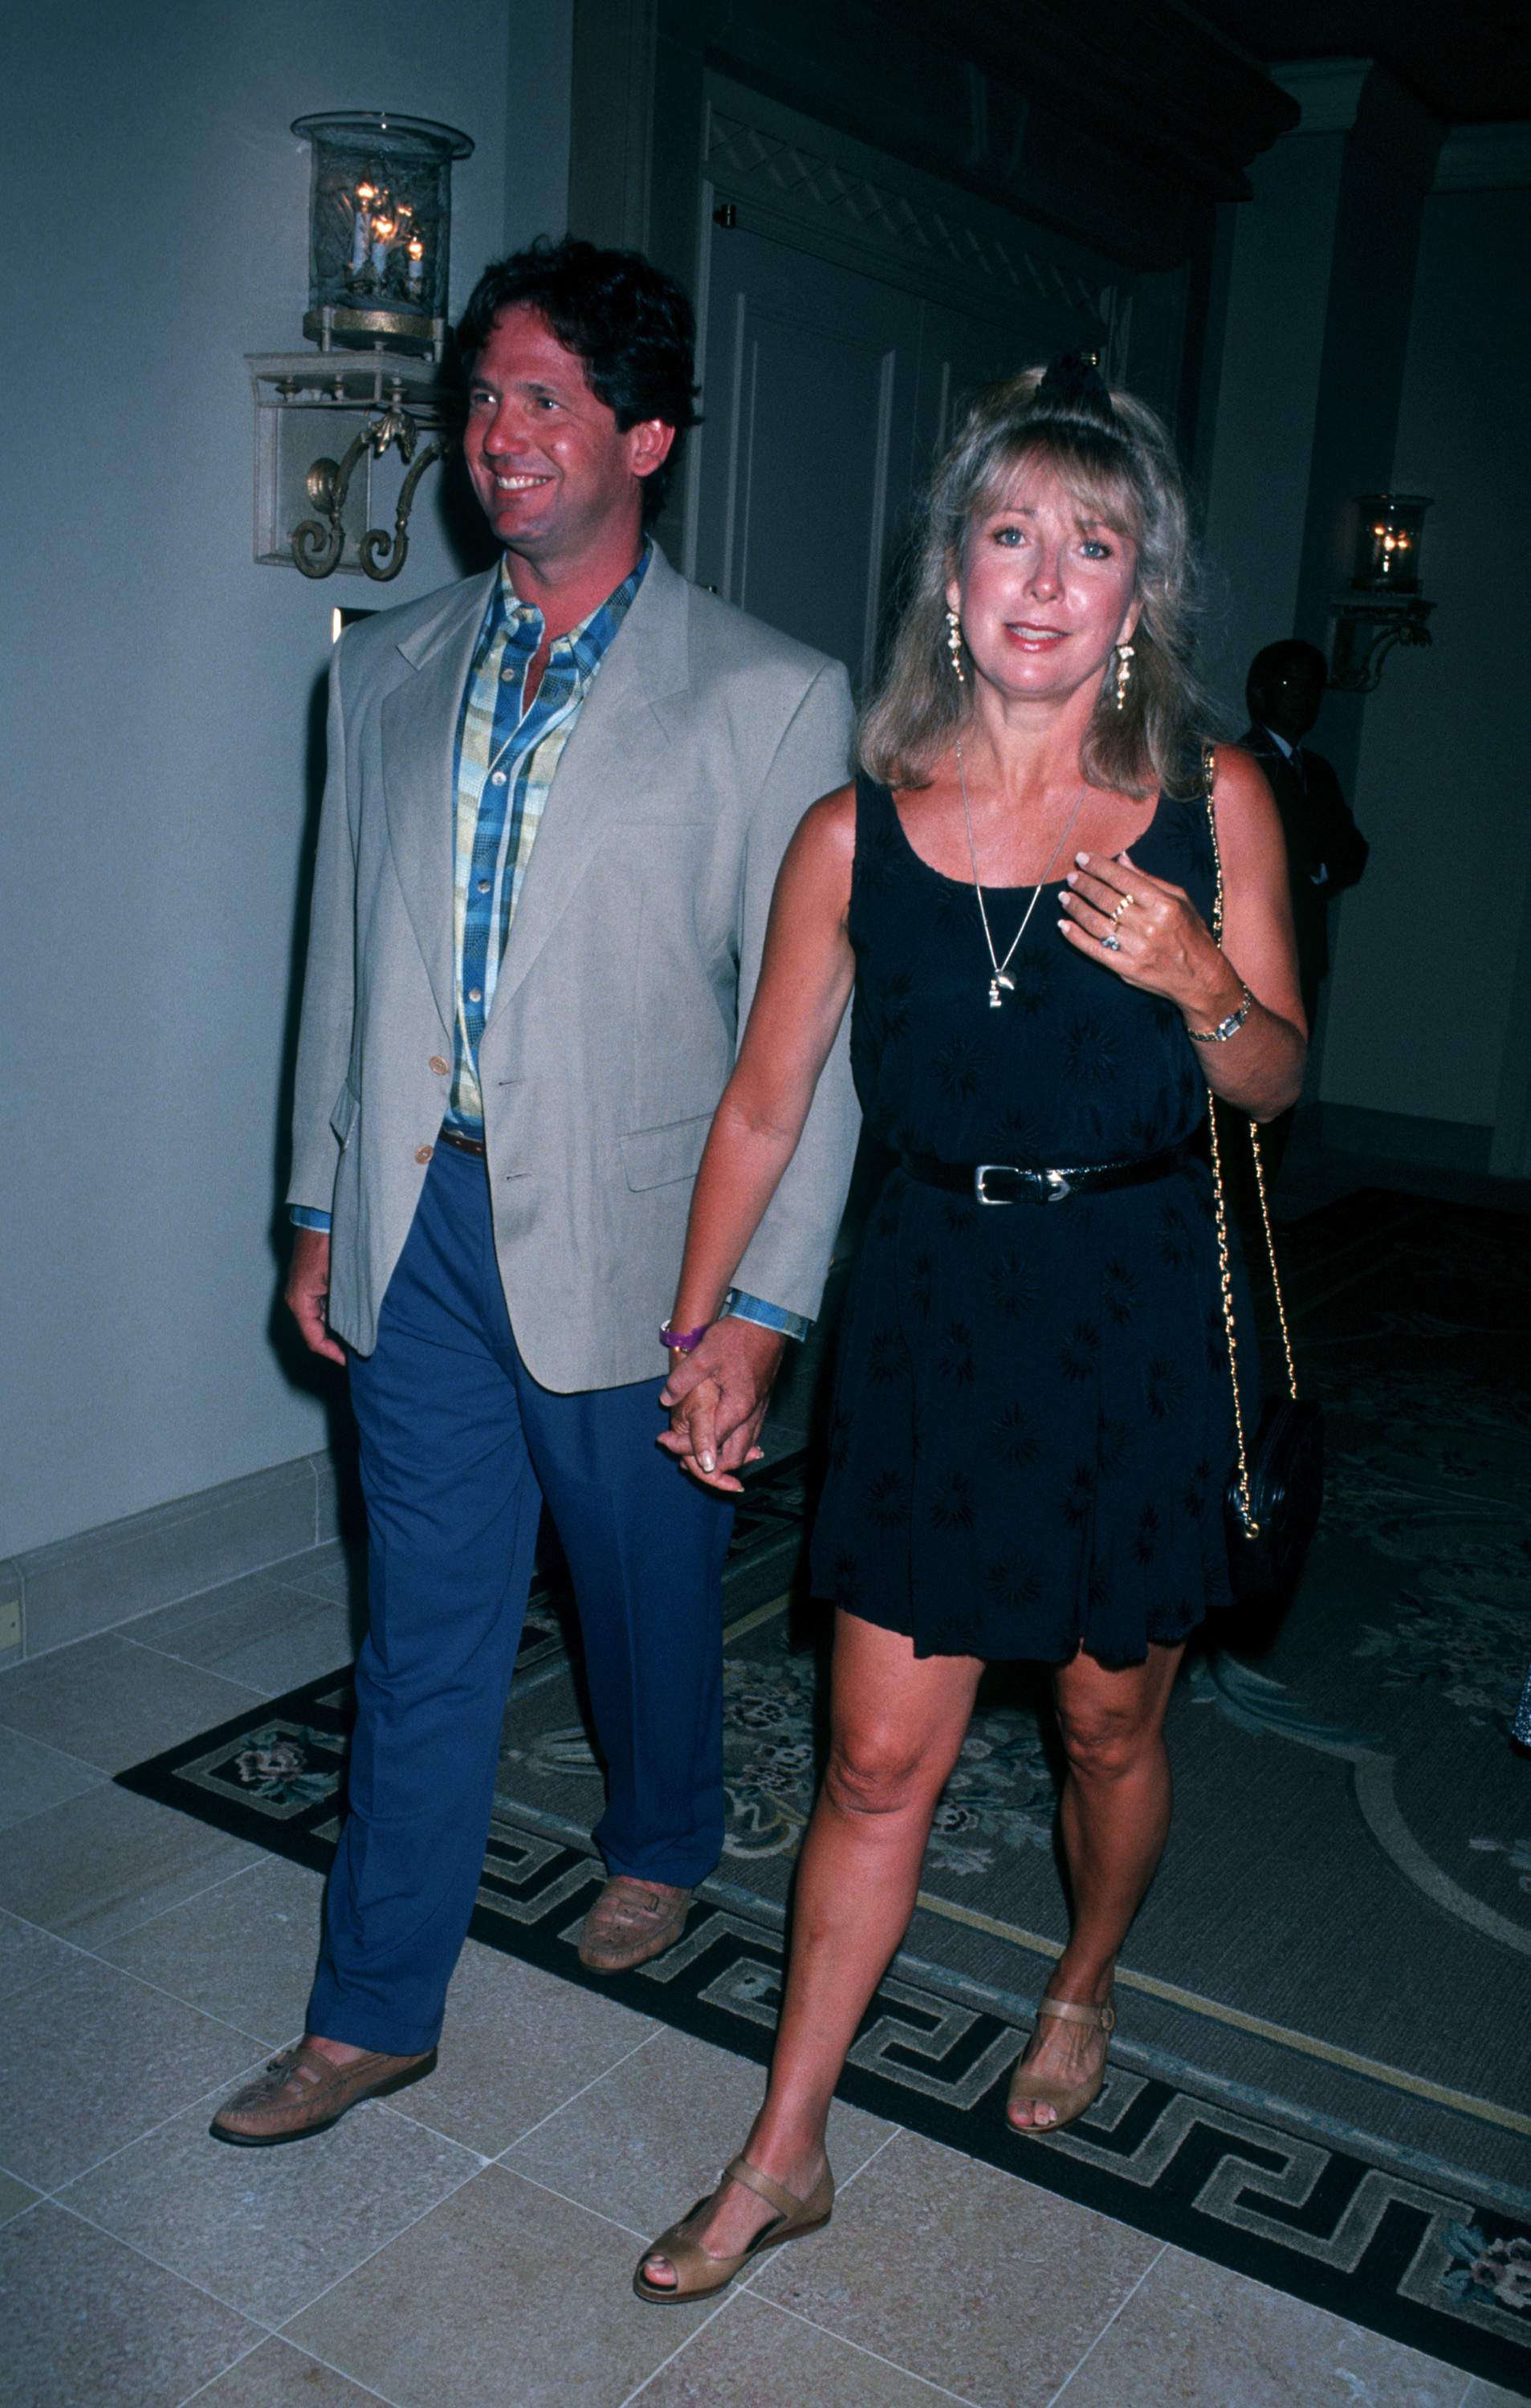 John O'Neil and Teri Garr during Celebrity Sport Invitational at Ritz Carlton in Mauna Lani, Hawaii on May 16, 1992. | Source: Getty Images